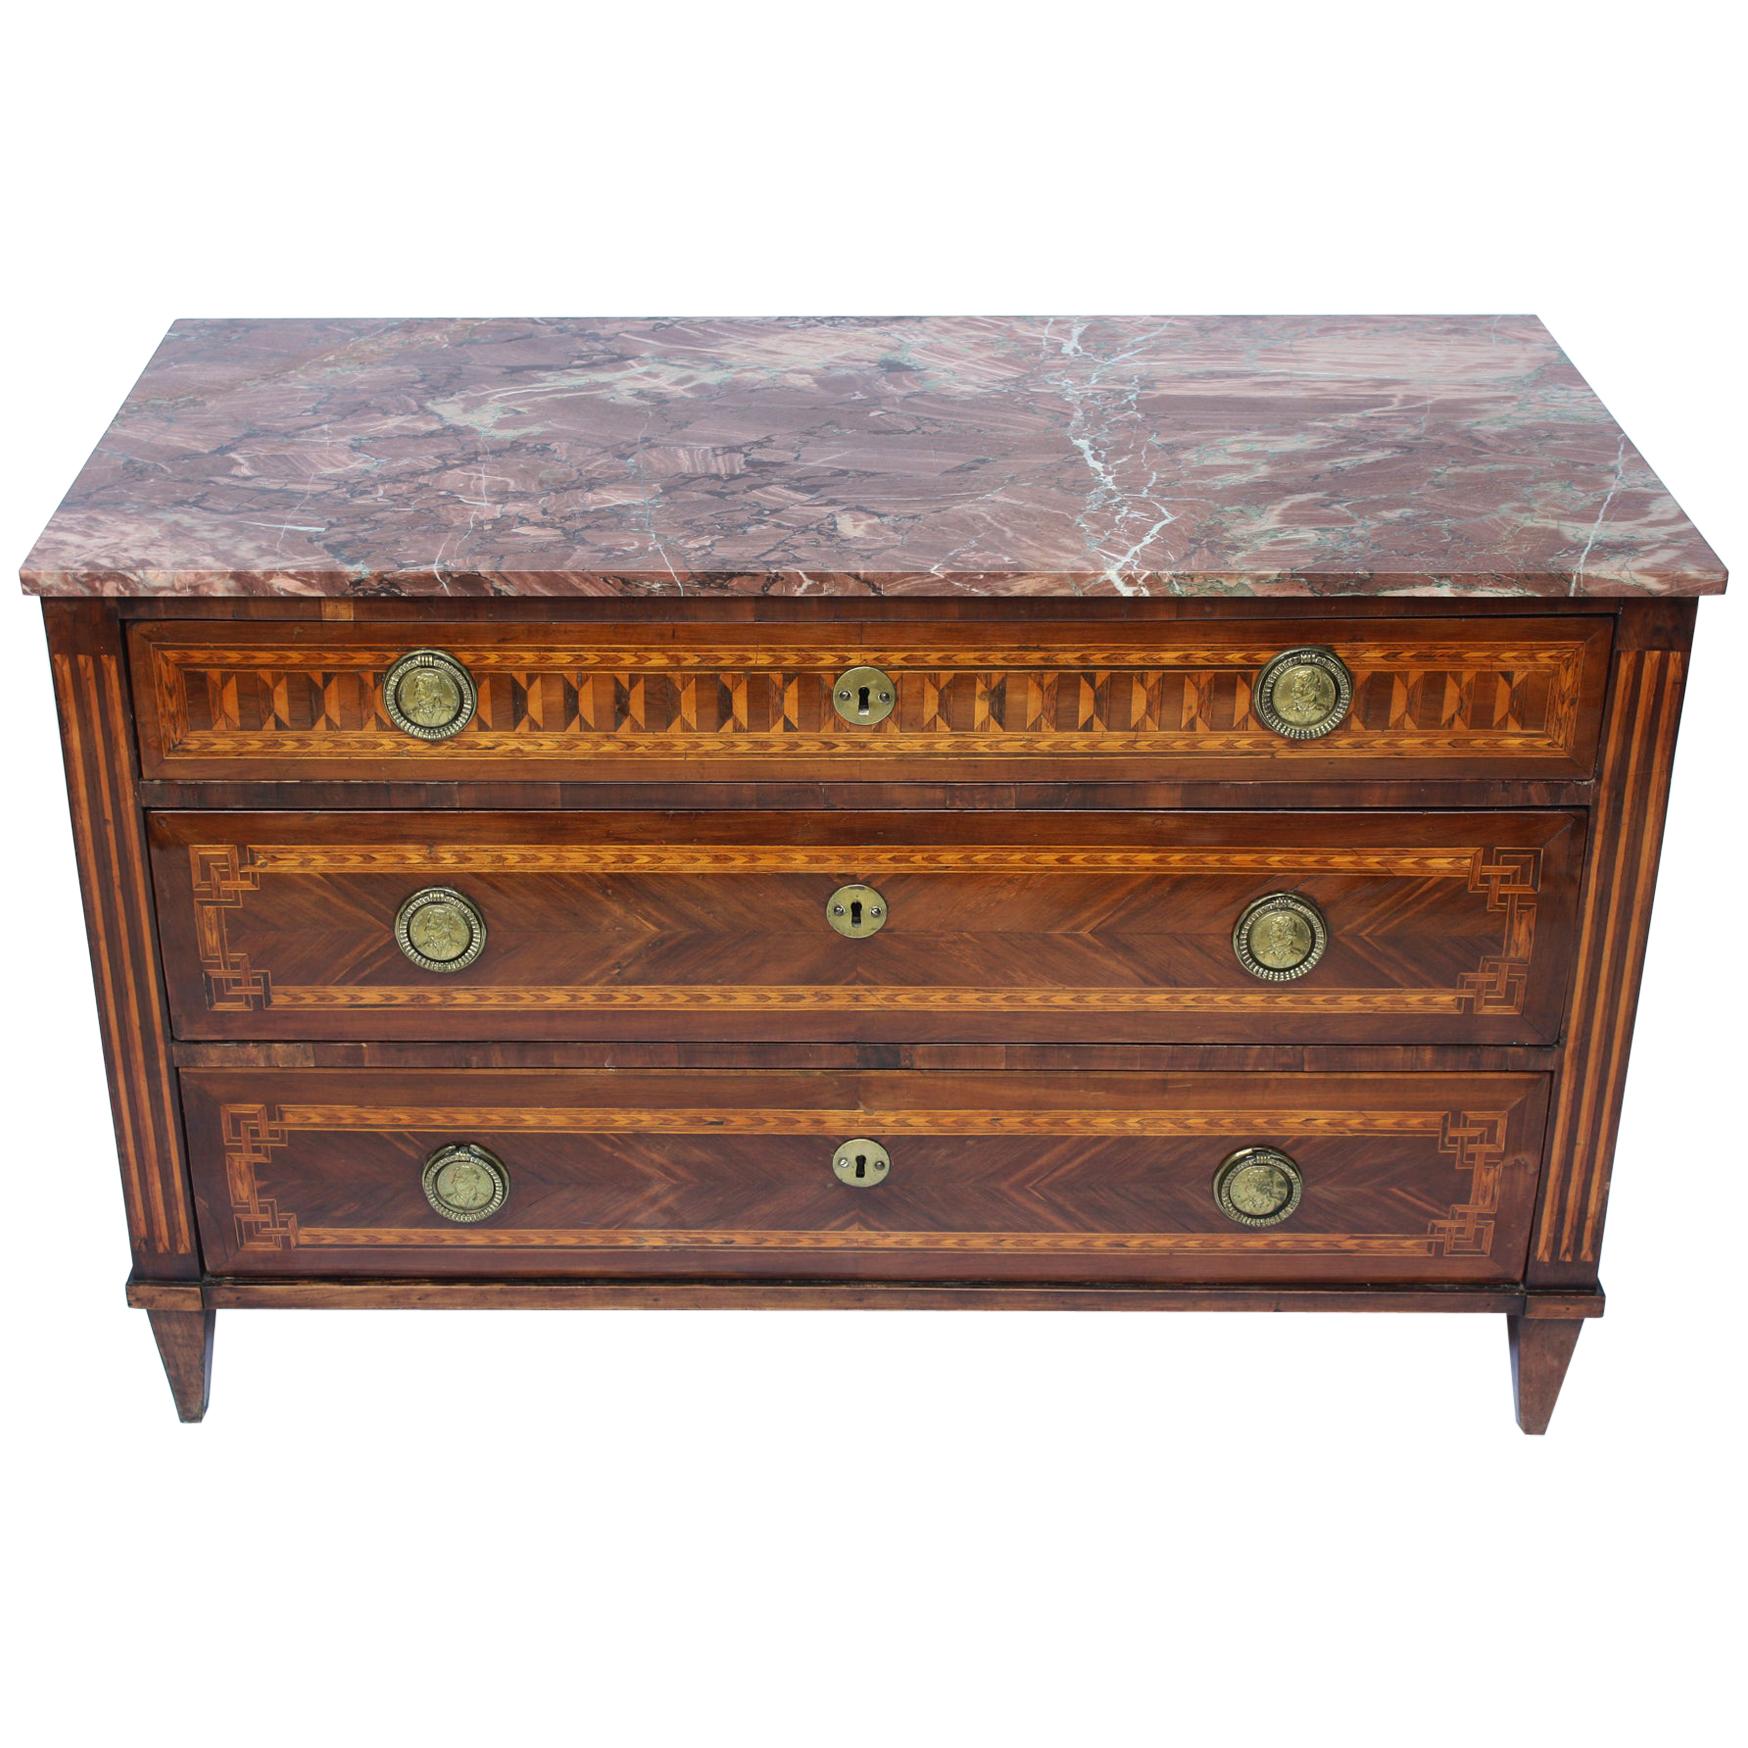 Late 18th Century Italian Neoclassical Commode with Marble Top